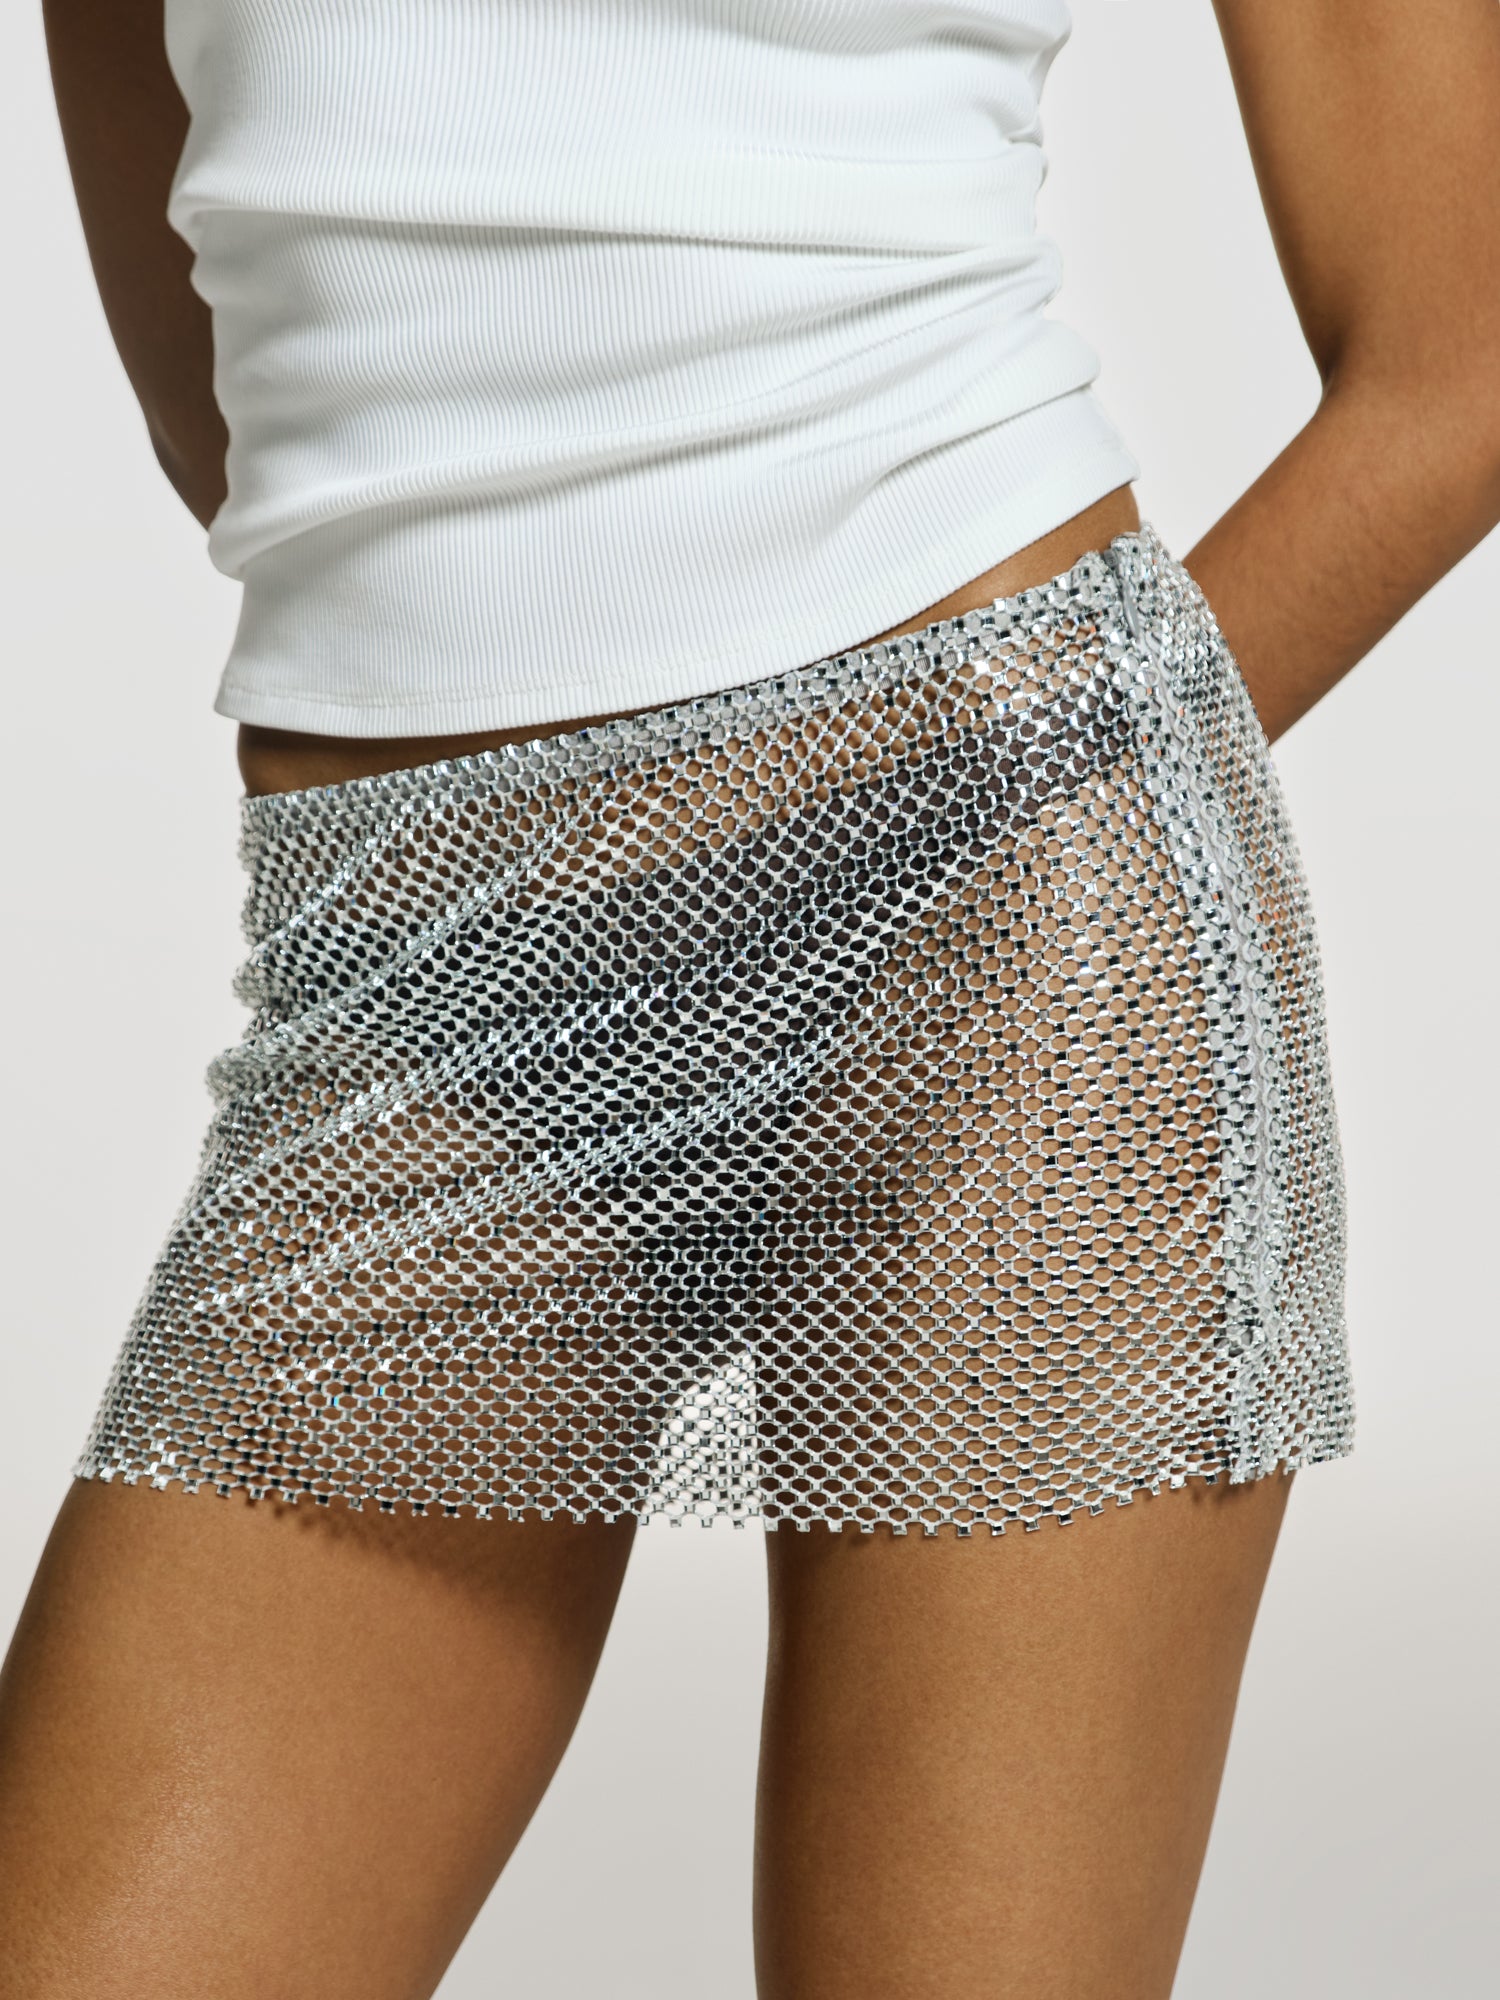 Closeup shot of a girl in a white viscose tank top and a grey net mini skirt decorated with rhinestones